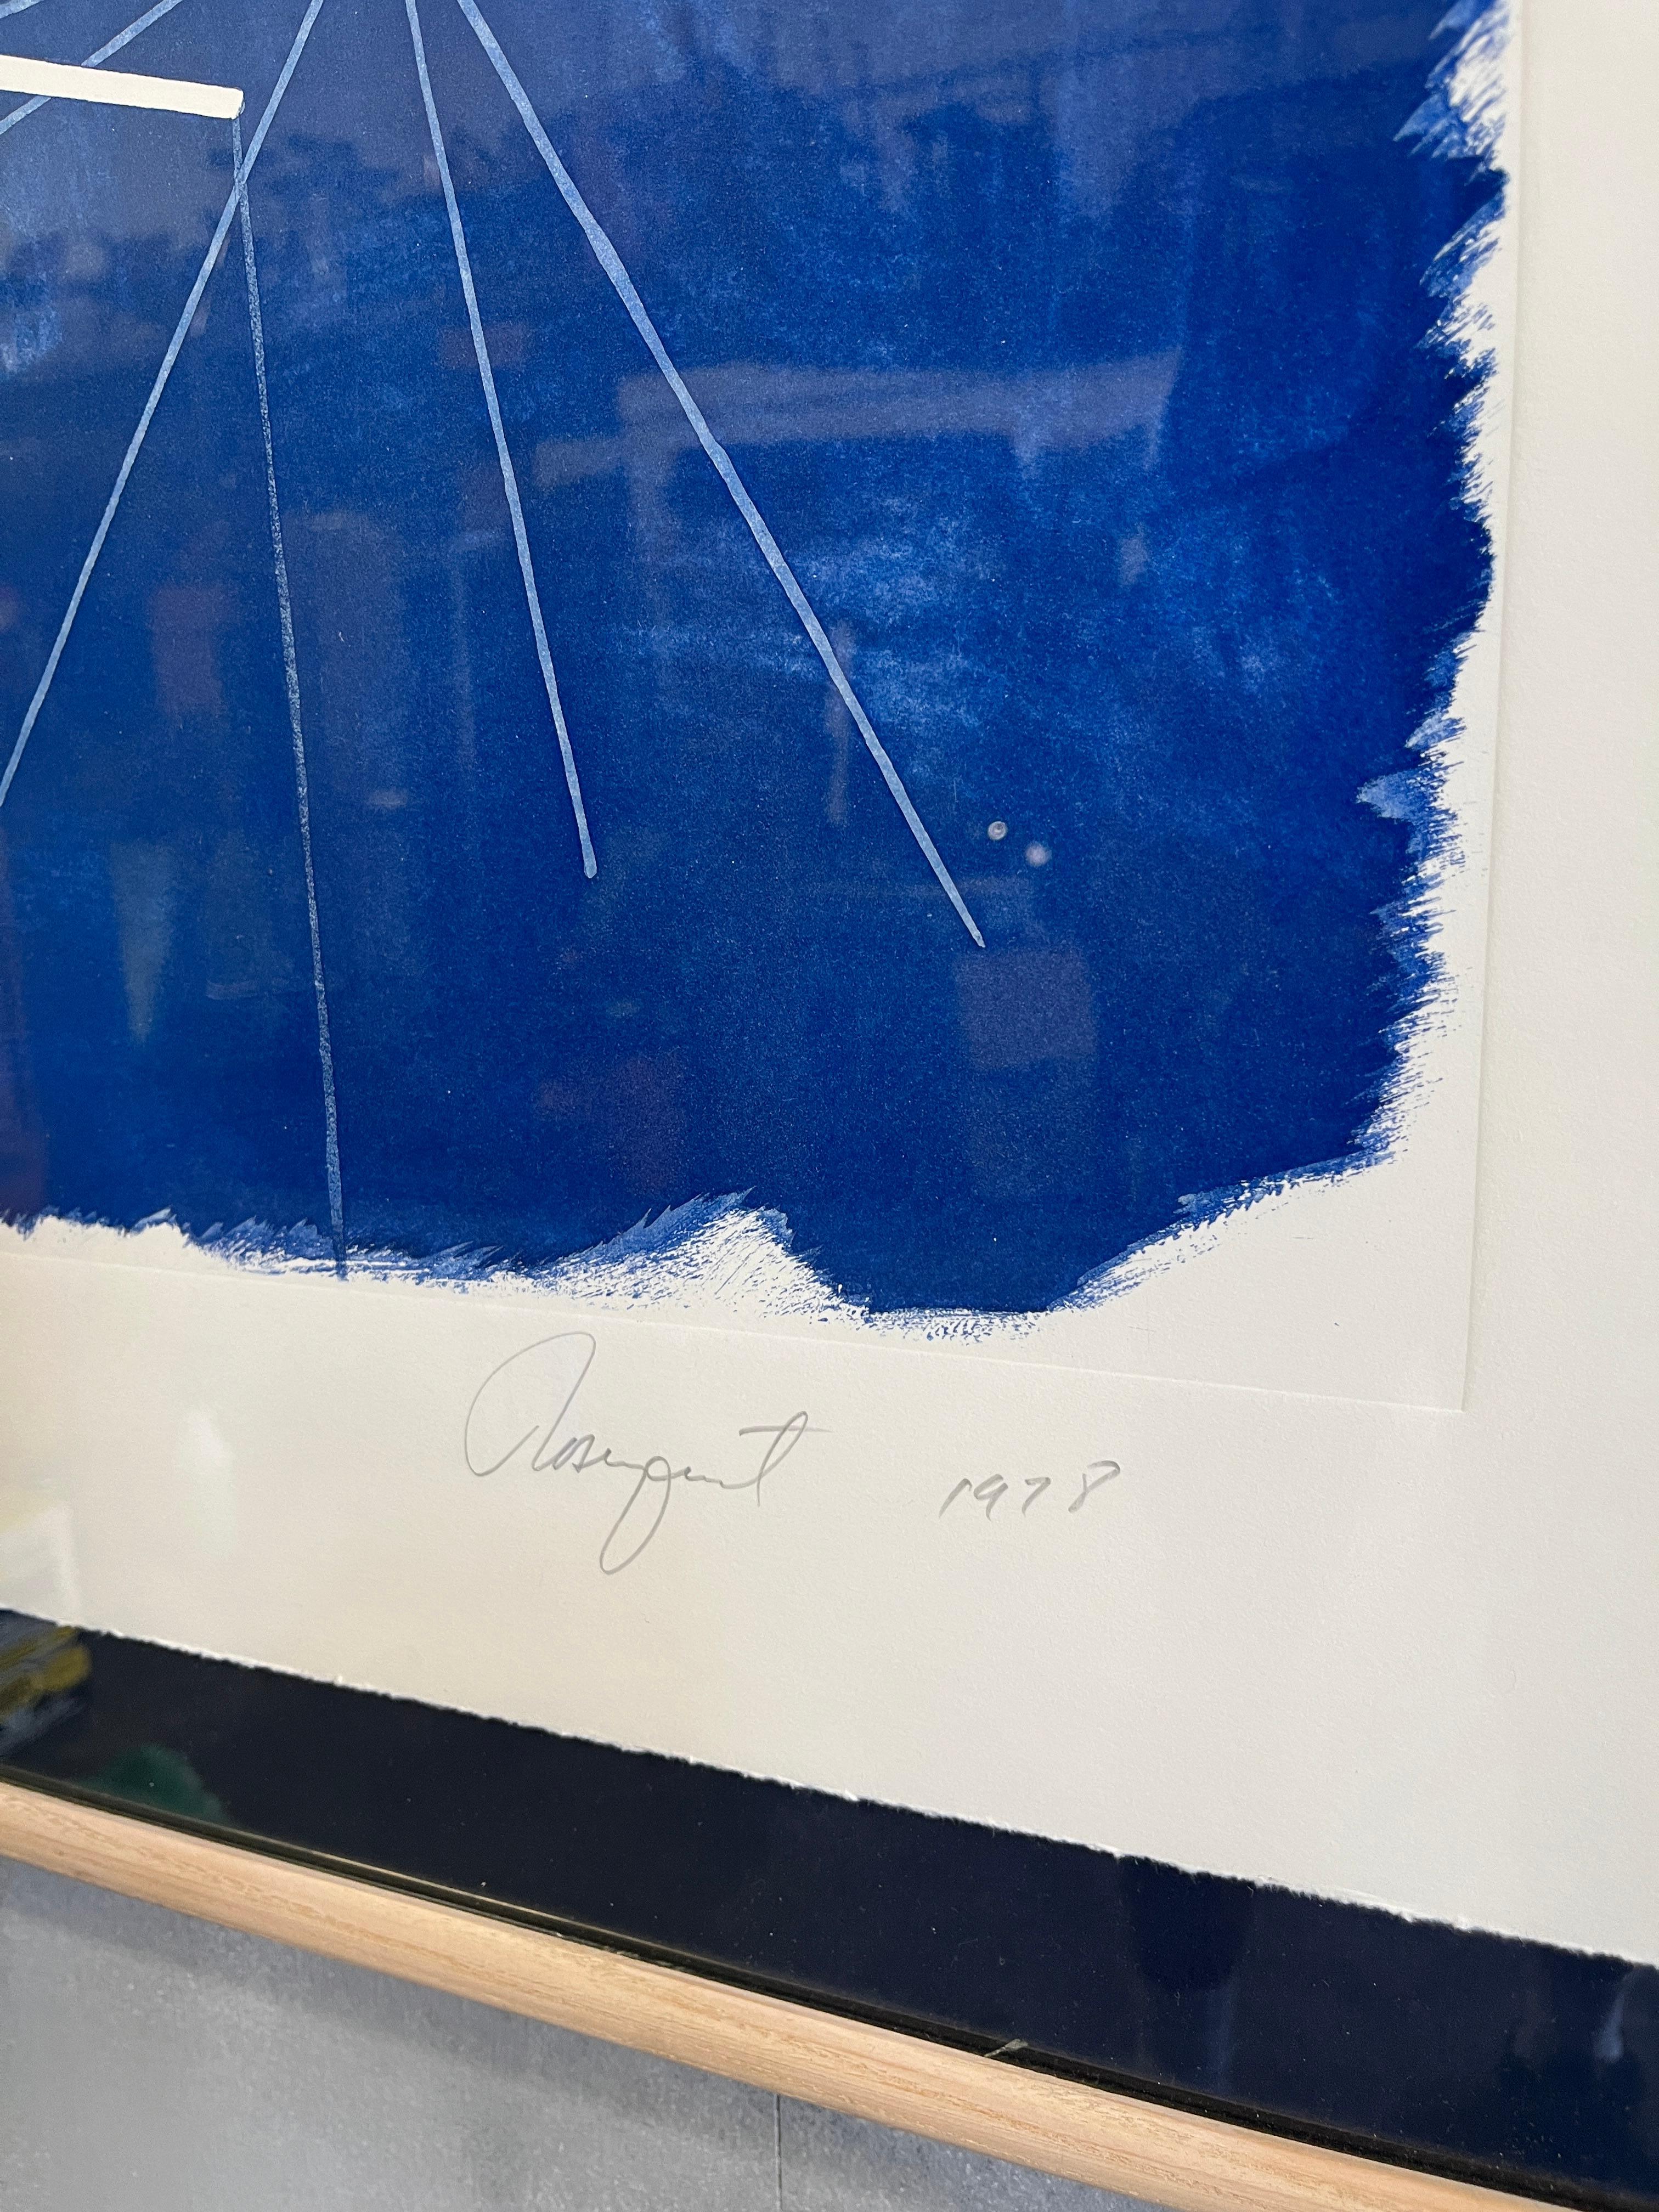 ASTRONOMICAL BLACKBOARD (G.149), 1978, etching, signed in pencil, from the numbered edition of 11/15 AP

 image 17 ¾ x 35 ¾”, full margins

Abstract Art , Pop Art

Frame: 44